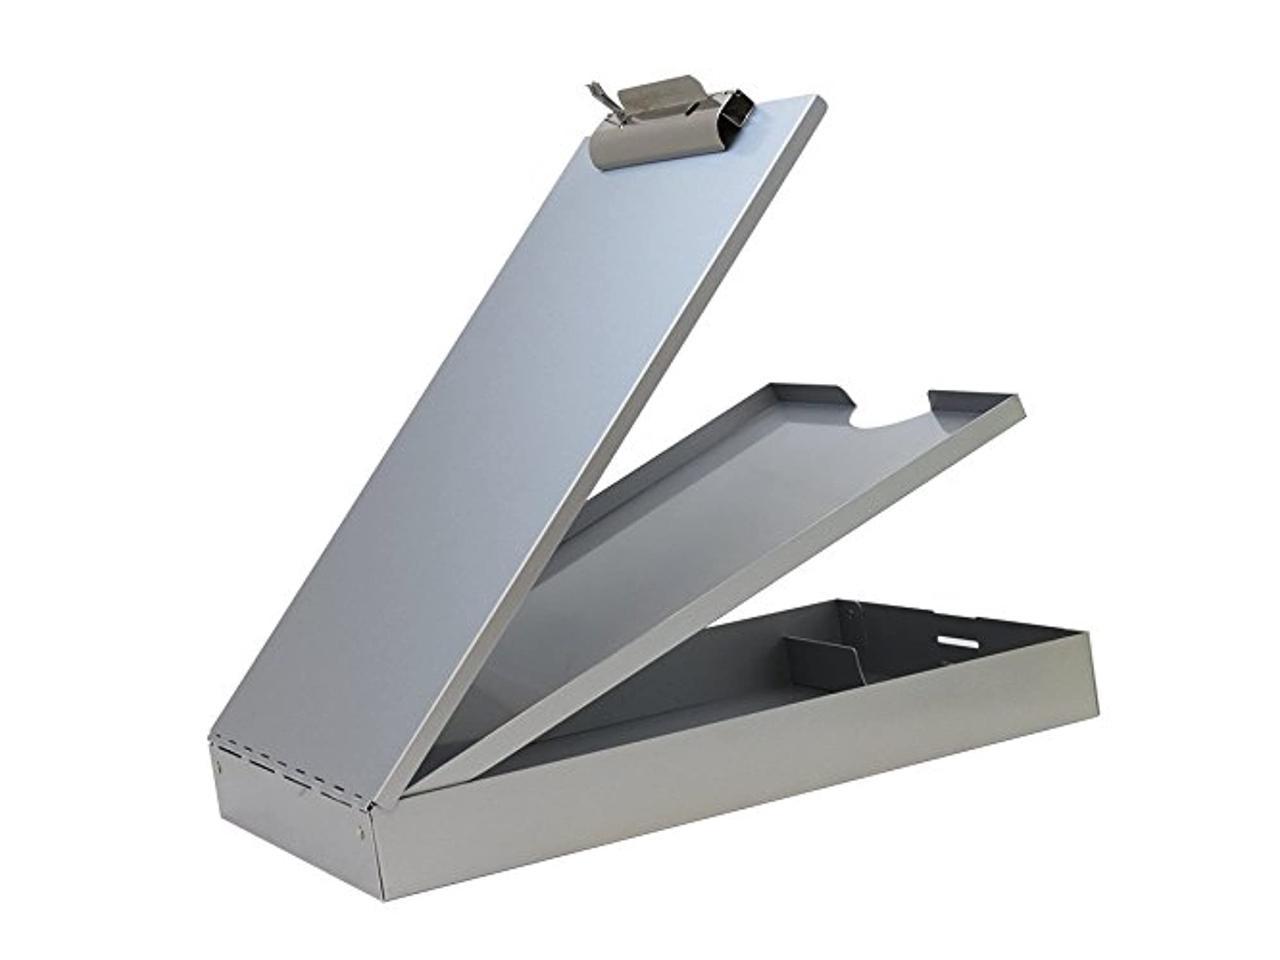 Details about   Small Aluminum Clipboard with Storage Form Holder Portfolio Aluminum Memo Size 